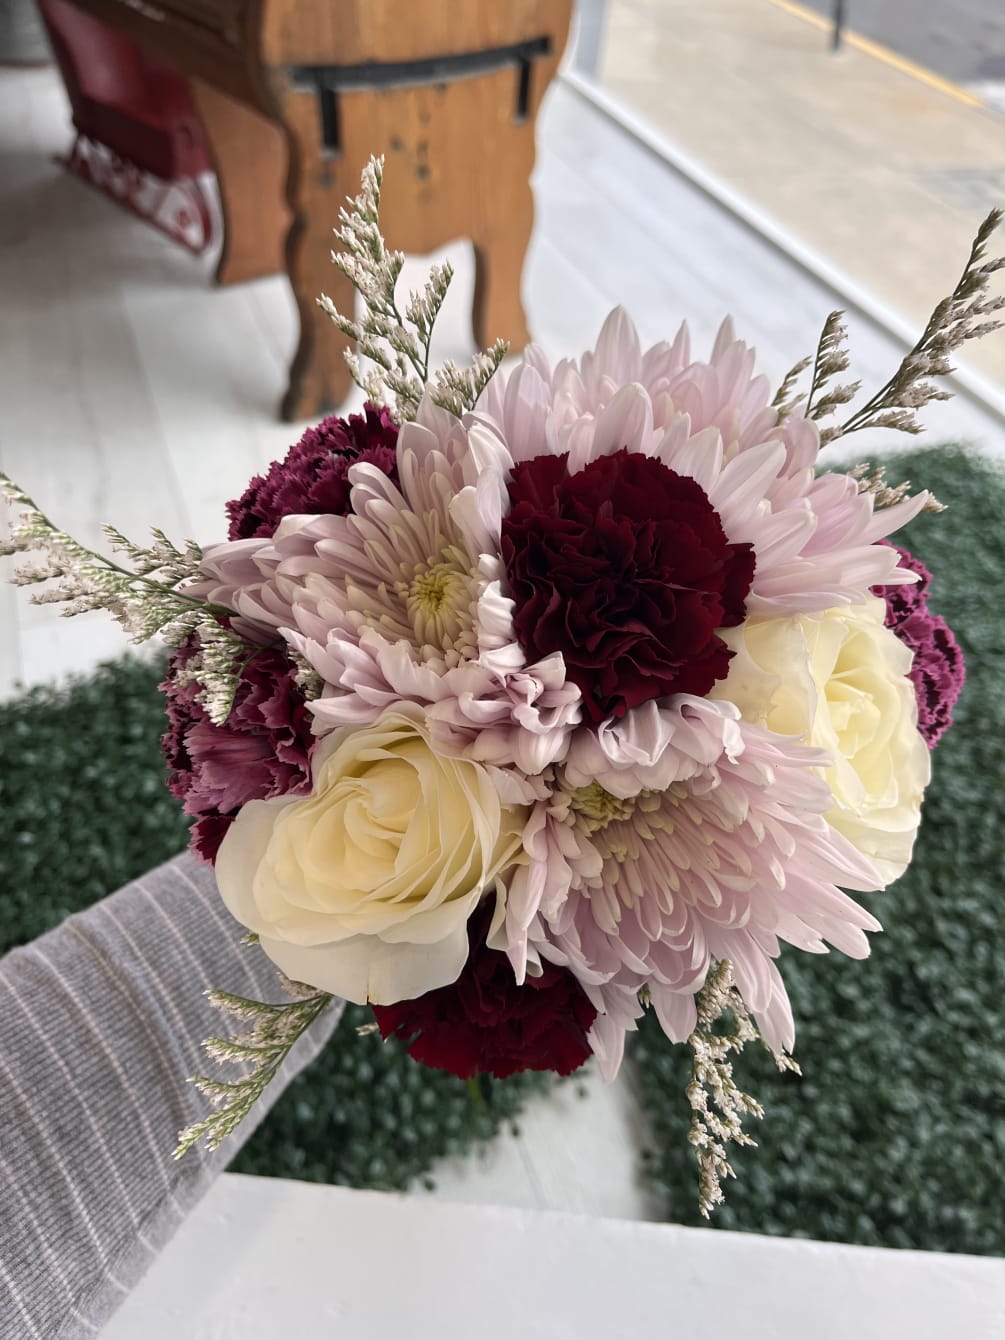 handheld bouquet with lavender, burgundy and purple flowers. finished with fresh greenery